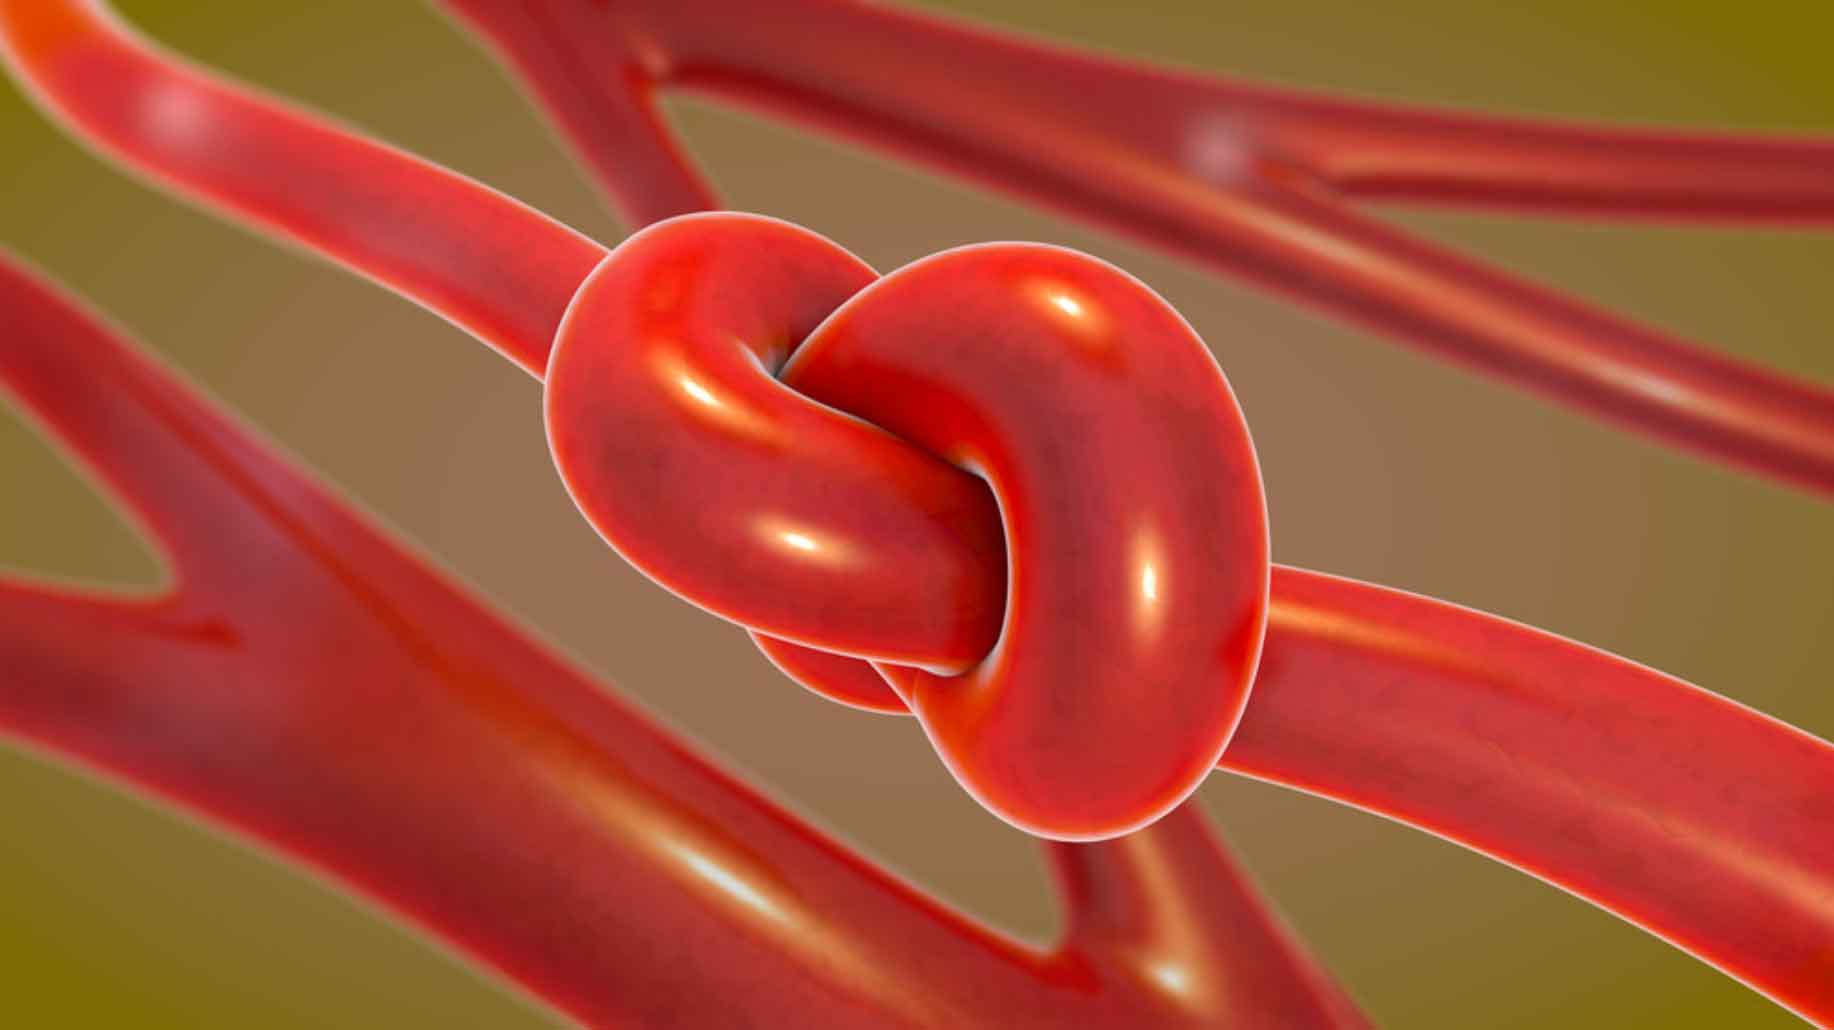 A stylized image of a knotted blood vessel.